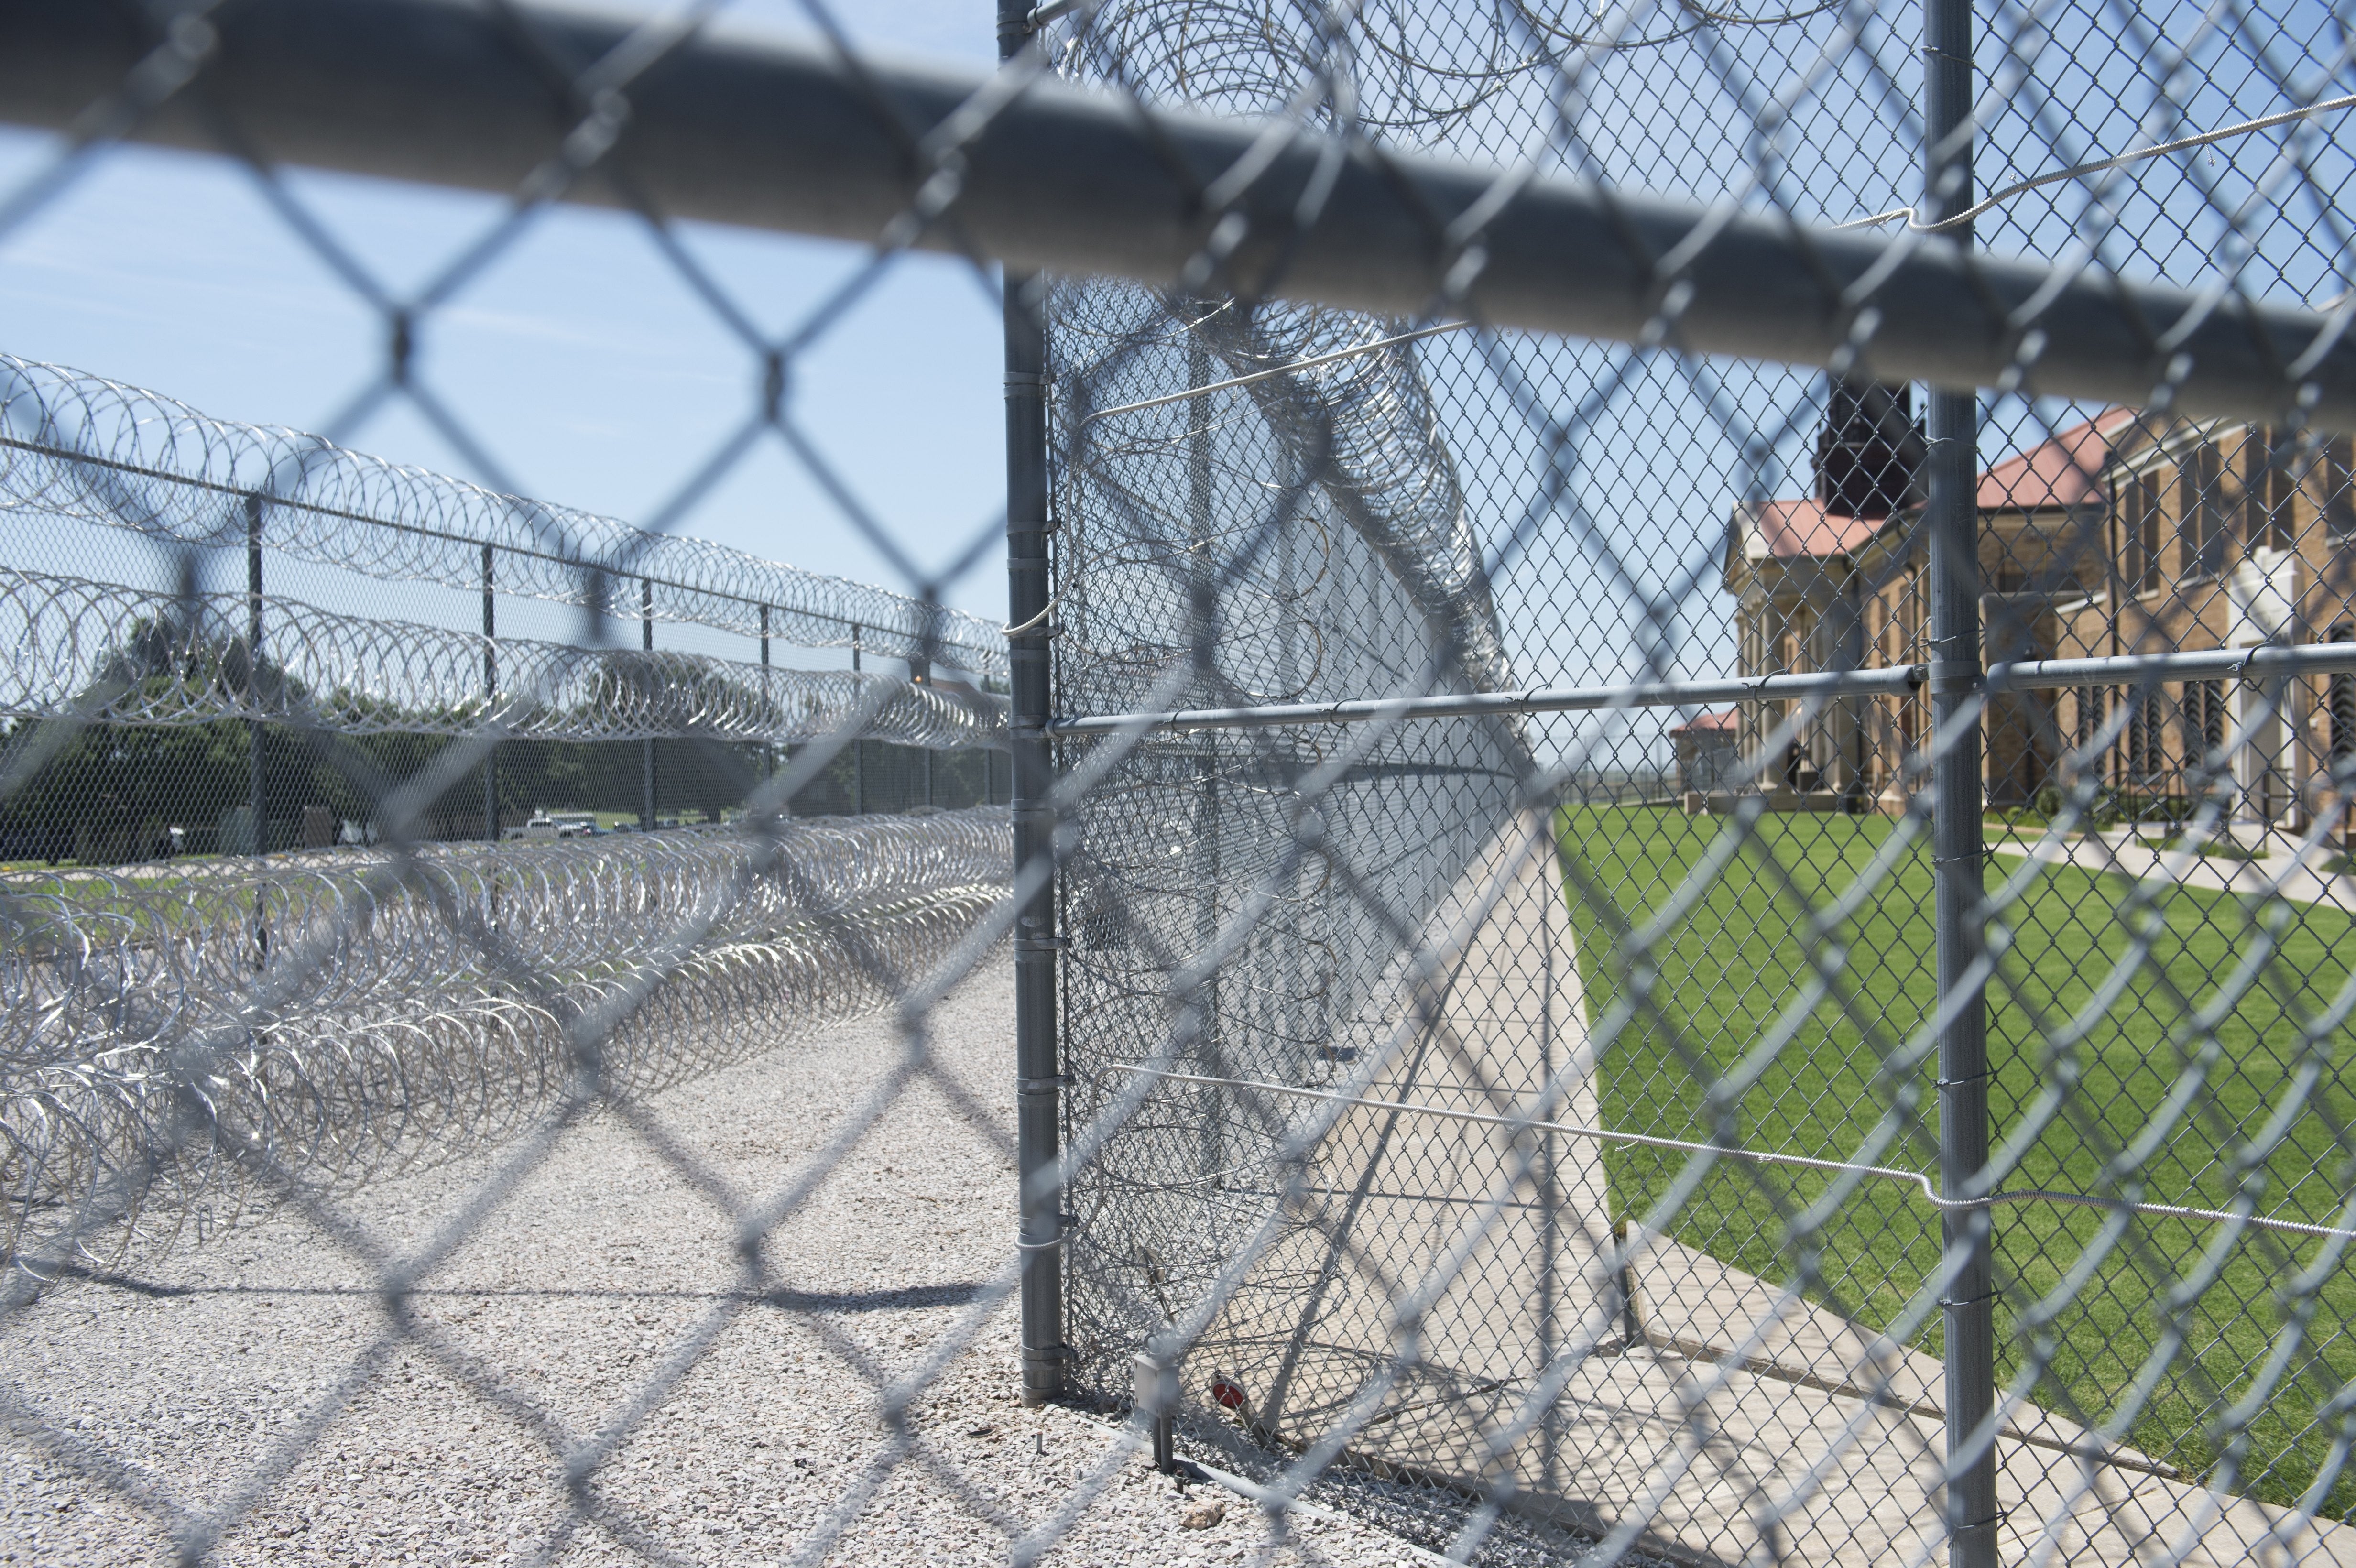 Fences and barbed wire at the entrance of the El Reno Federal Correctional Institution in El Reno, Oklahoma, 16 July, 2015.